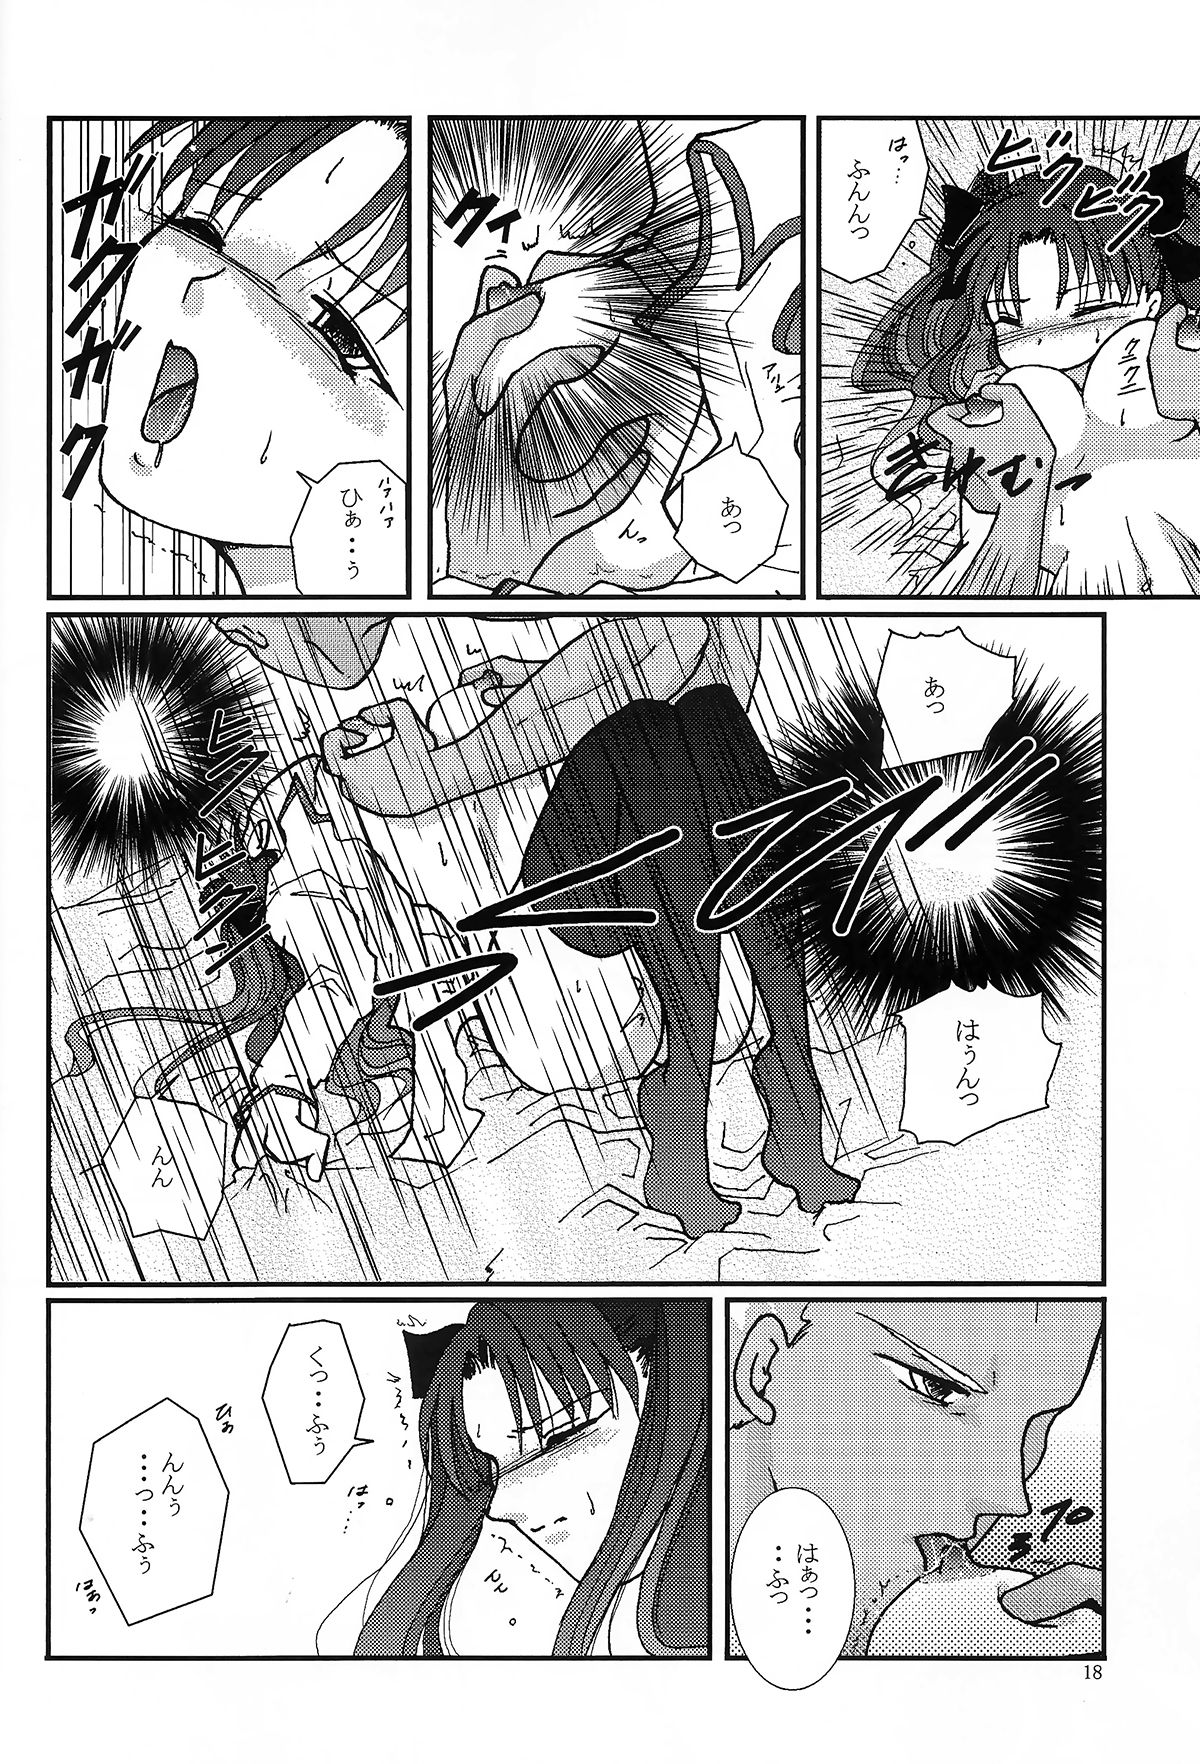 (SC24) [Takeda Syouten (Takeda Sora)] Question-7 (Fate/stay night) page 16 full